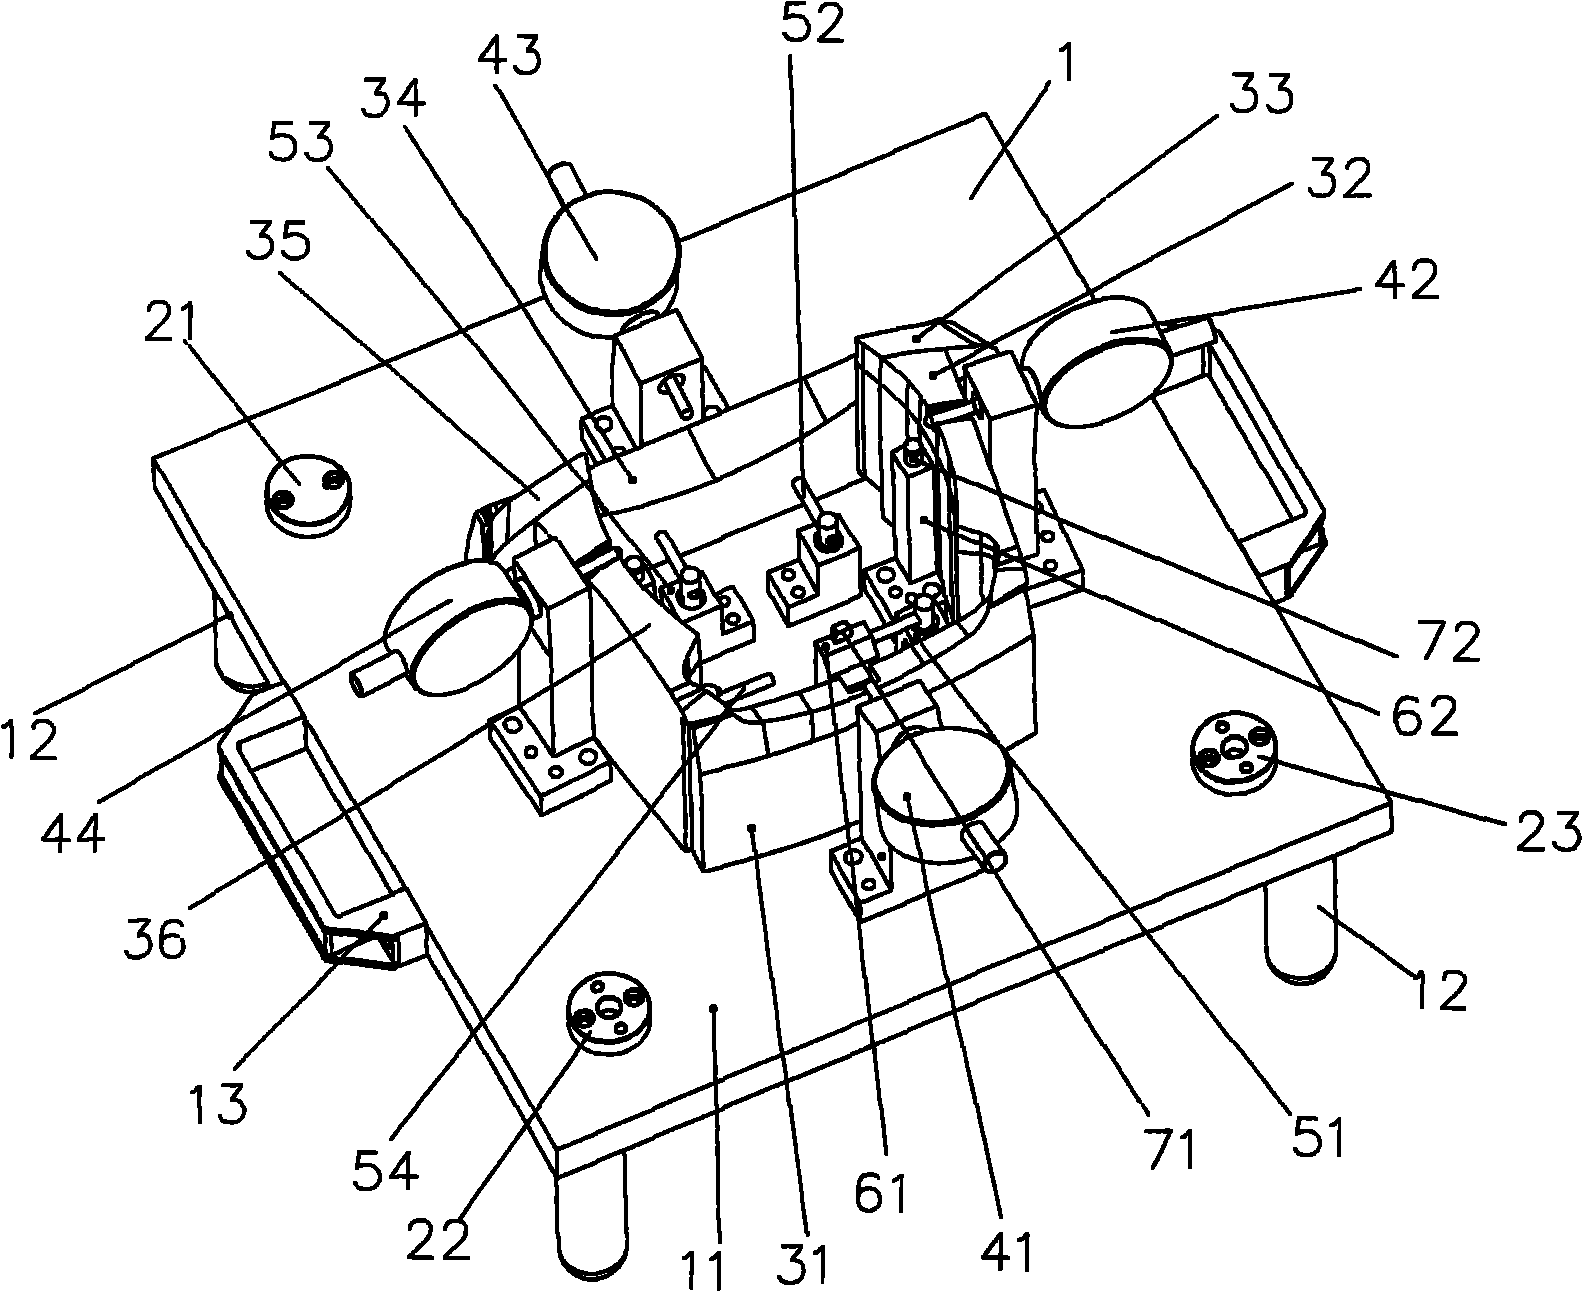 Gap detection device of safety airbag